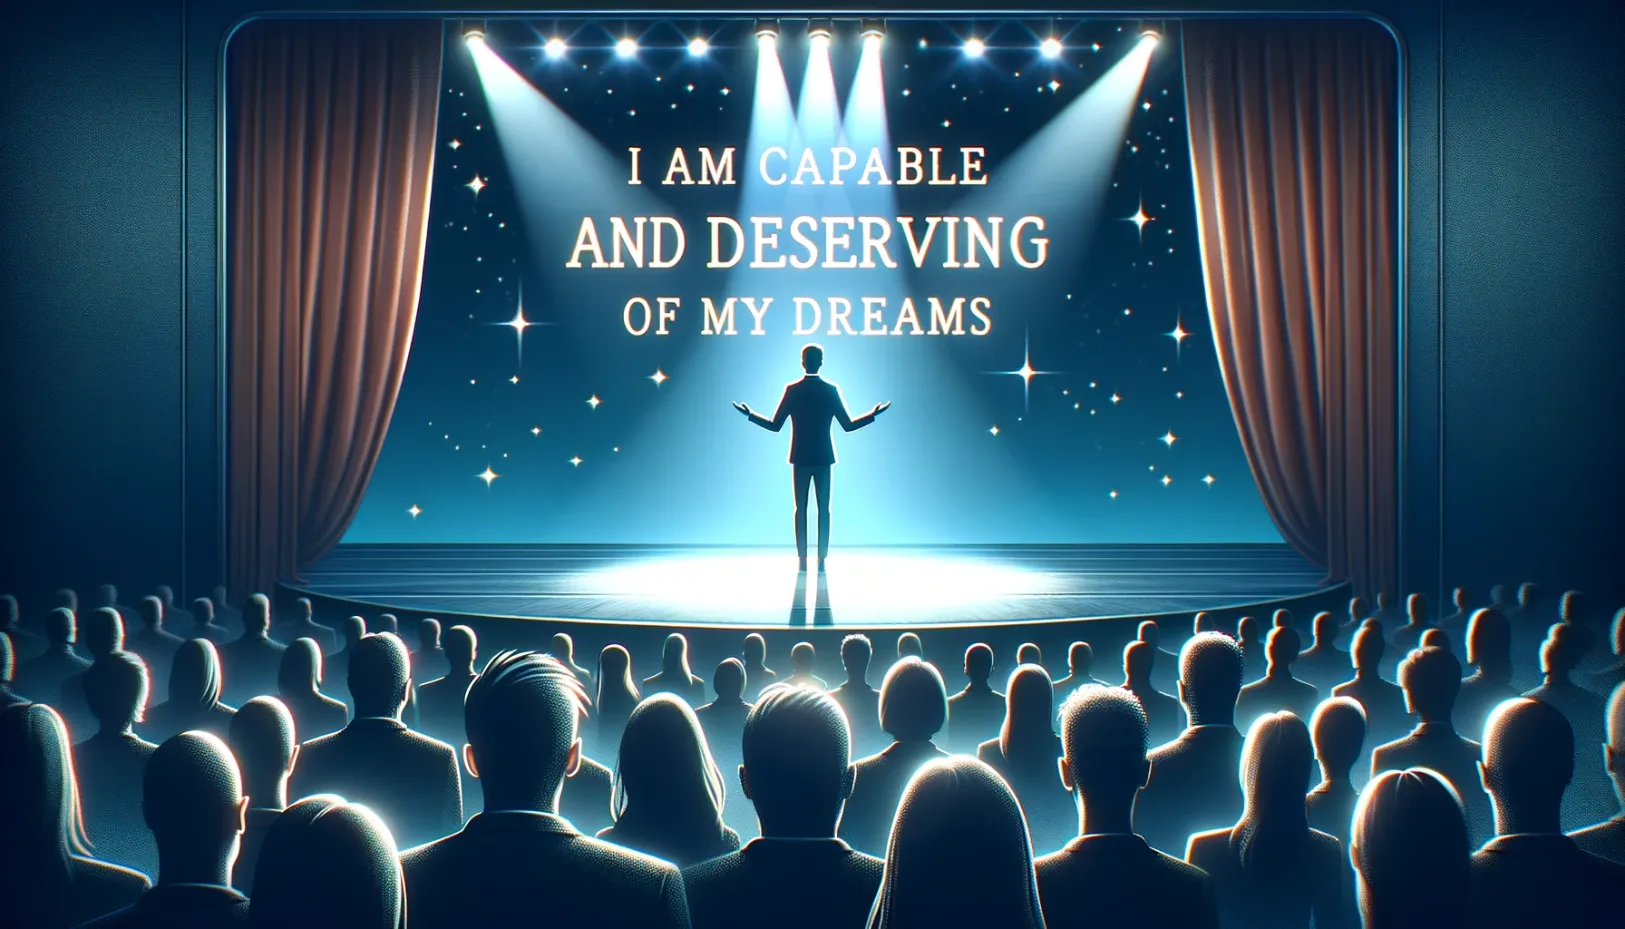 I Am Capable and Deserving of My Dreams mantras